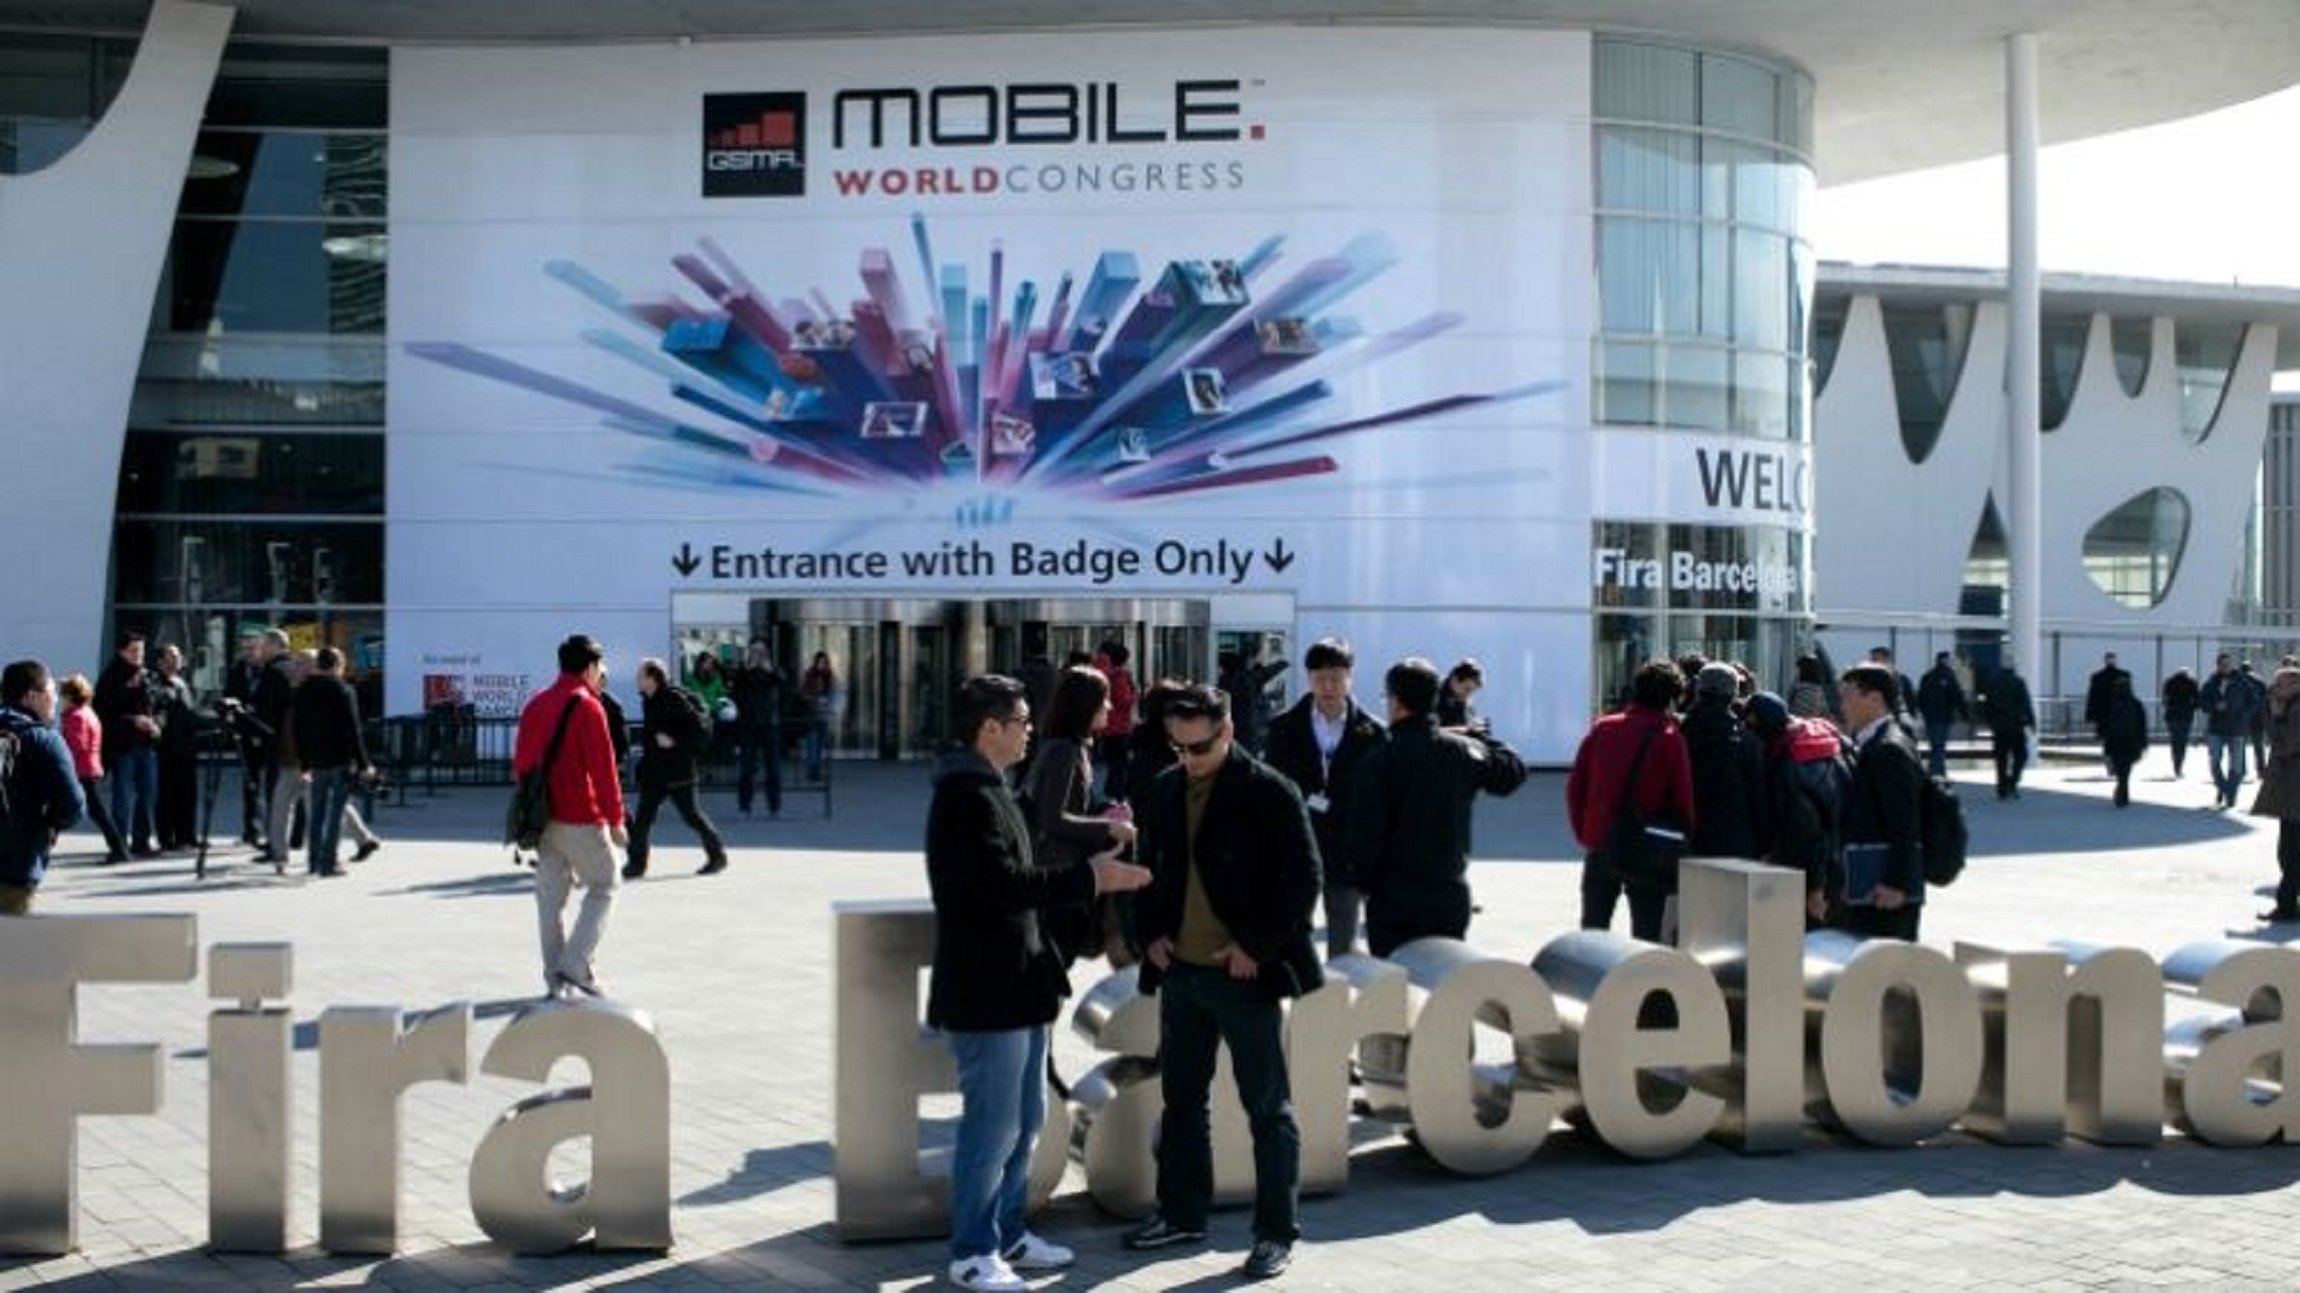 Organizers say Mobile World Congress is still on, despite stream of cancellations